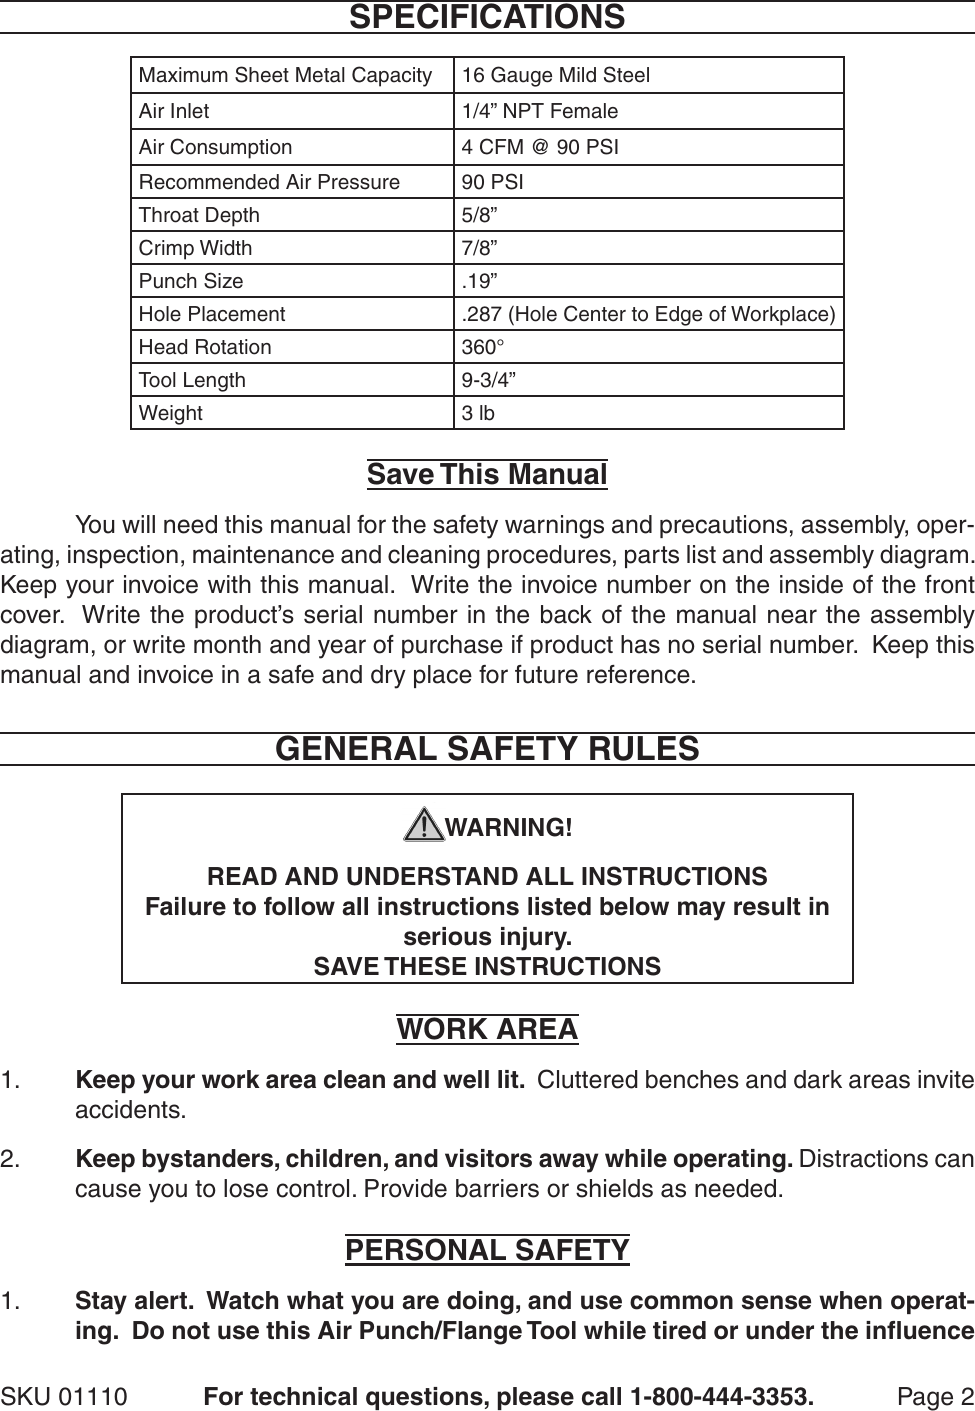 Page 2 of 11 - Harbor-Freight Harbor-Freight-Air-Punch-Flange-Tool-Product-Manual-  Harbor-freight-air-punch-flange-tool-product-manual